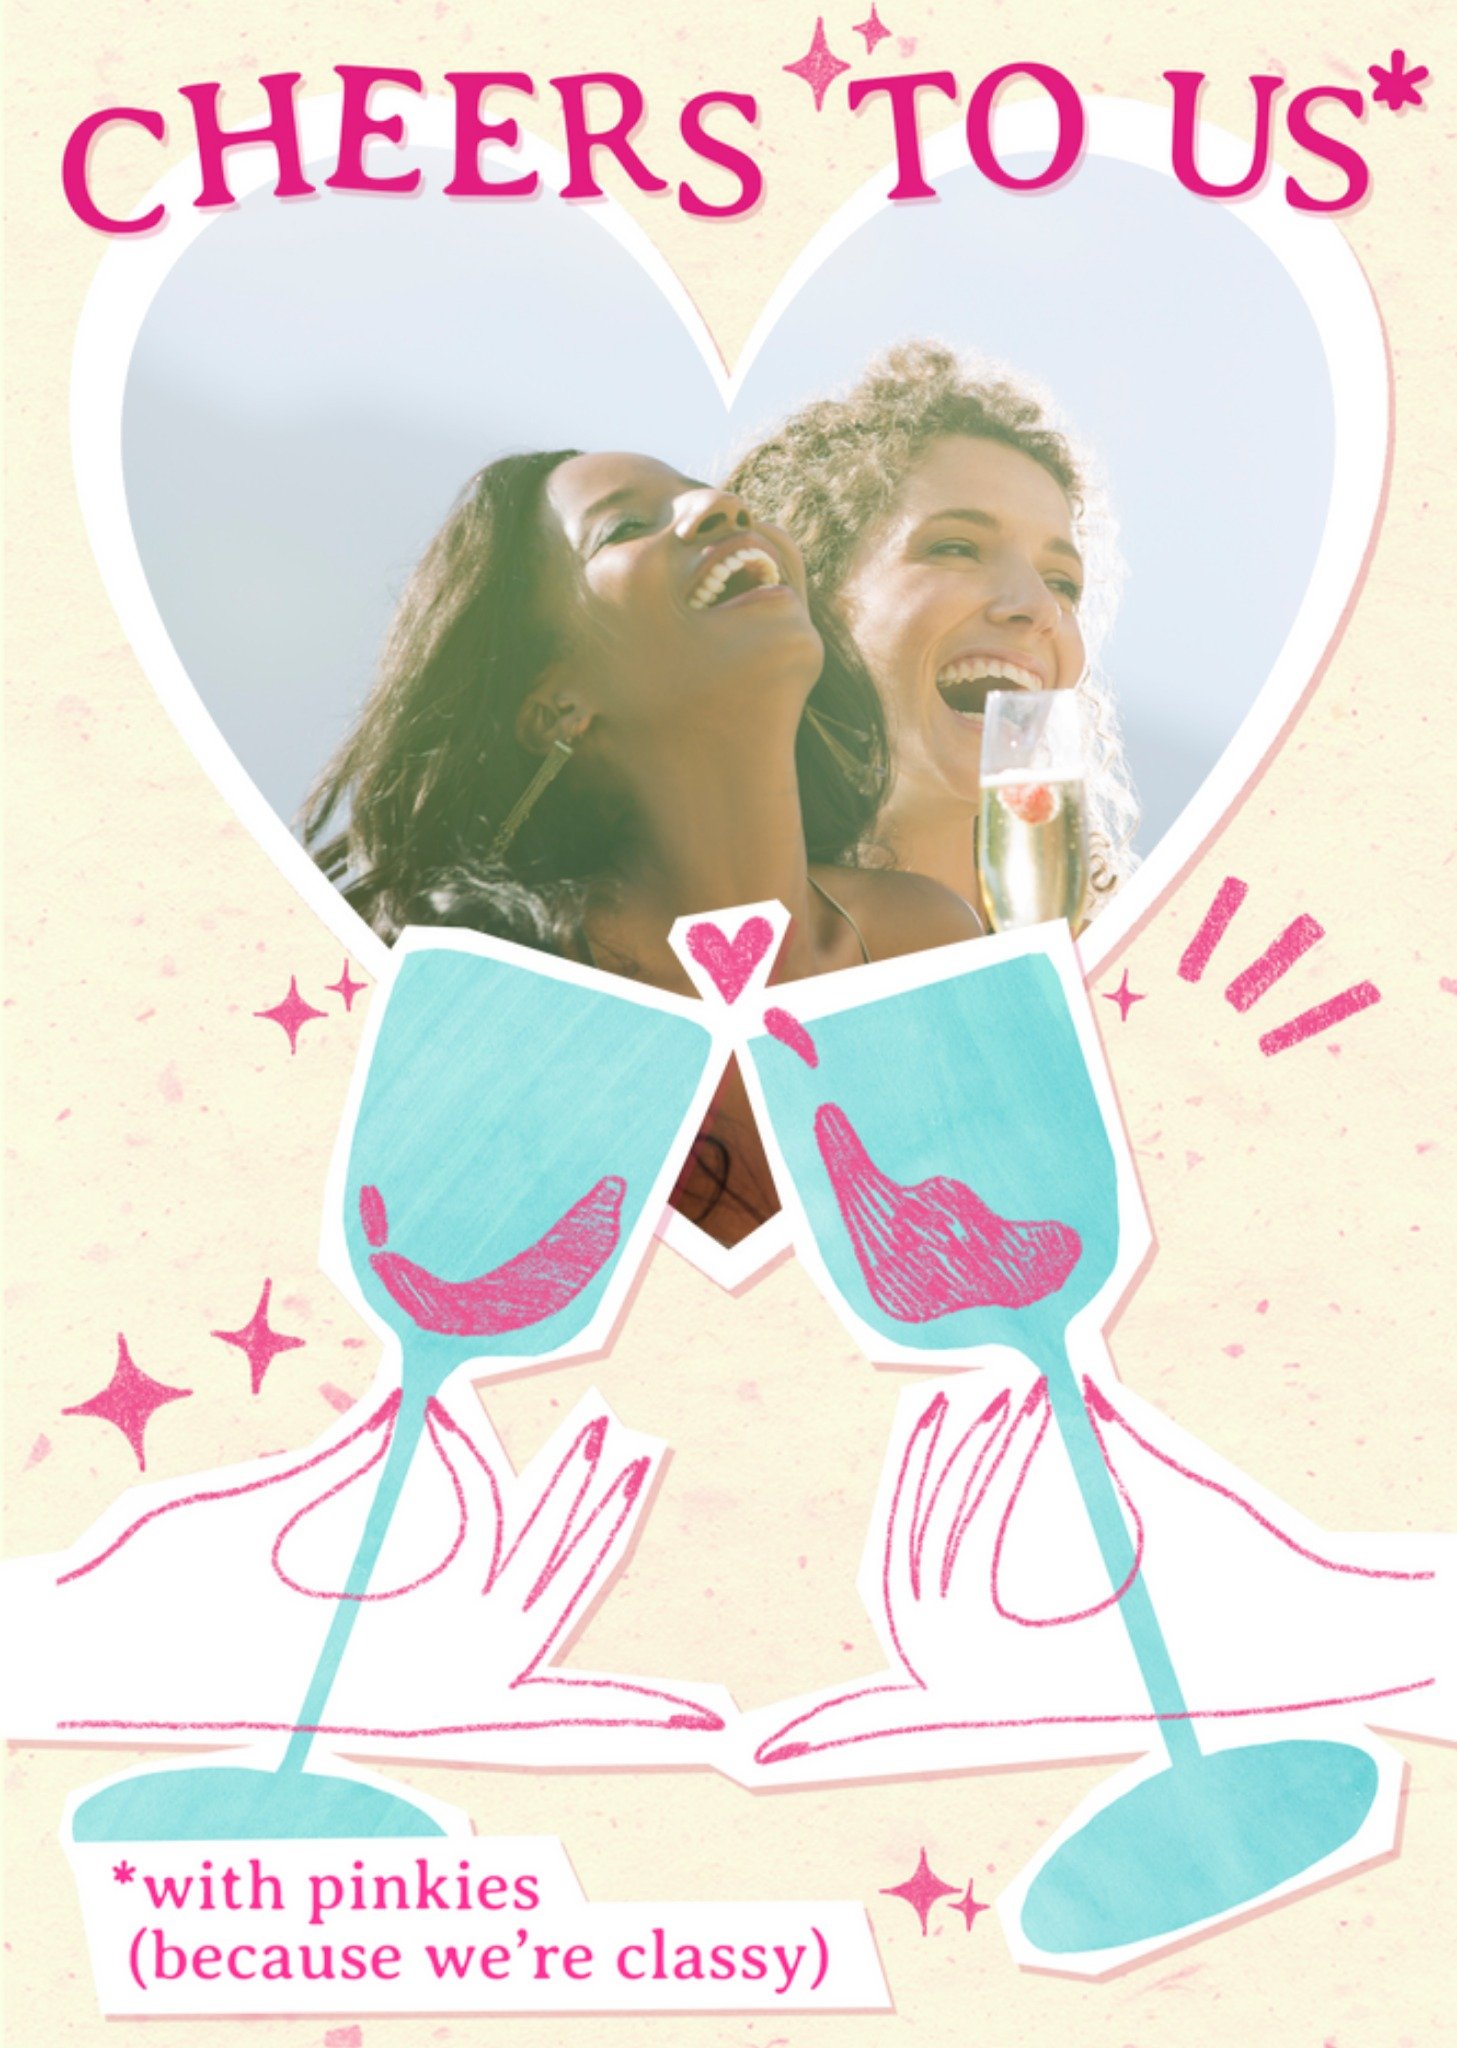 Moonpig Cheers To Us With Pinkies Funny Classy Friendship Photo Upload Card, Large